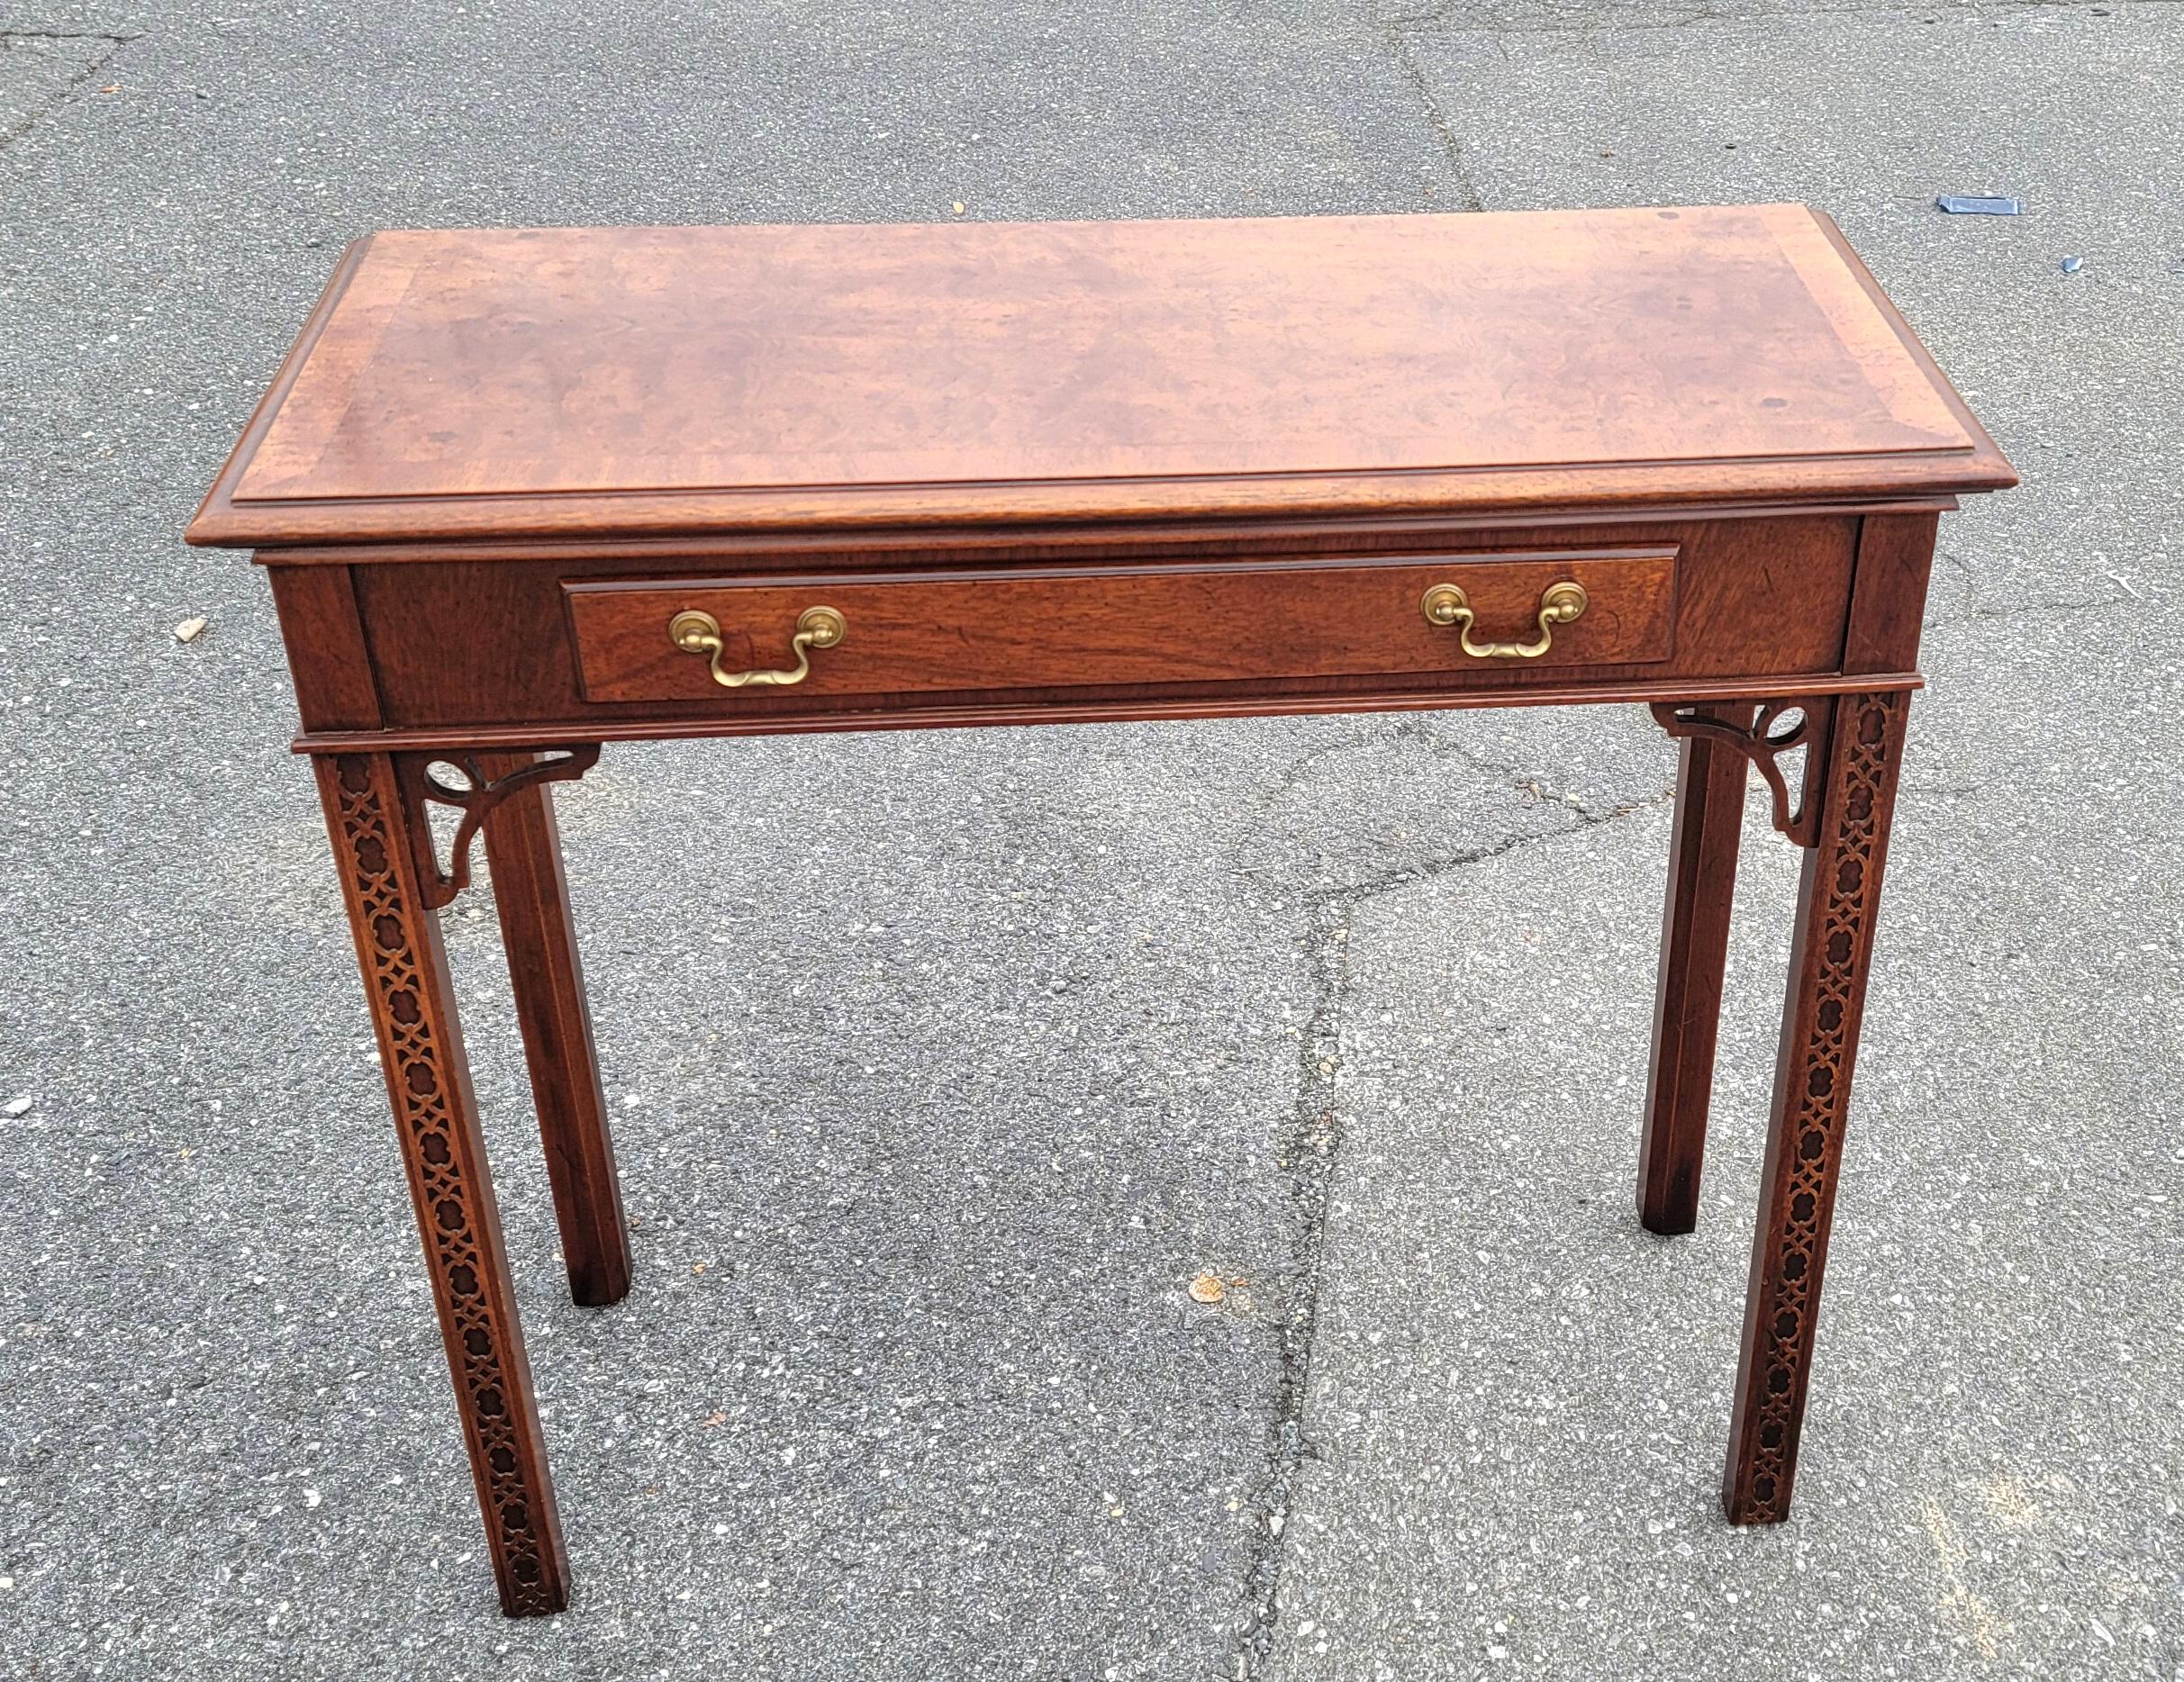 1970s Chippendale Walnut Burl Console Table with Fretwork and Banded Top For Sale 10